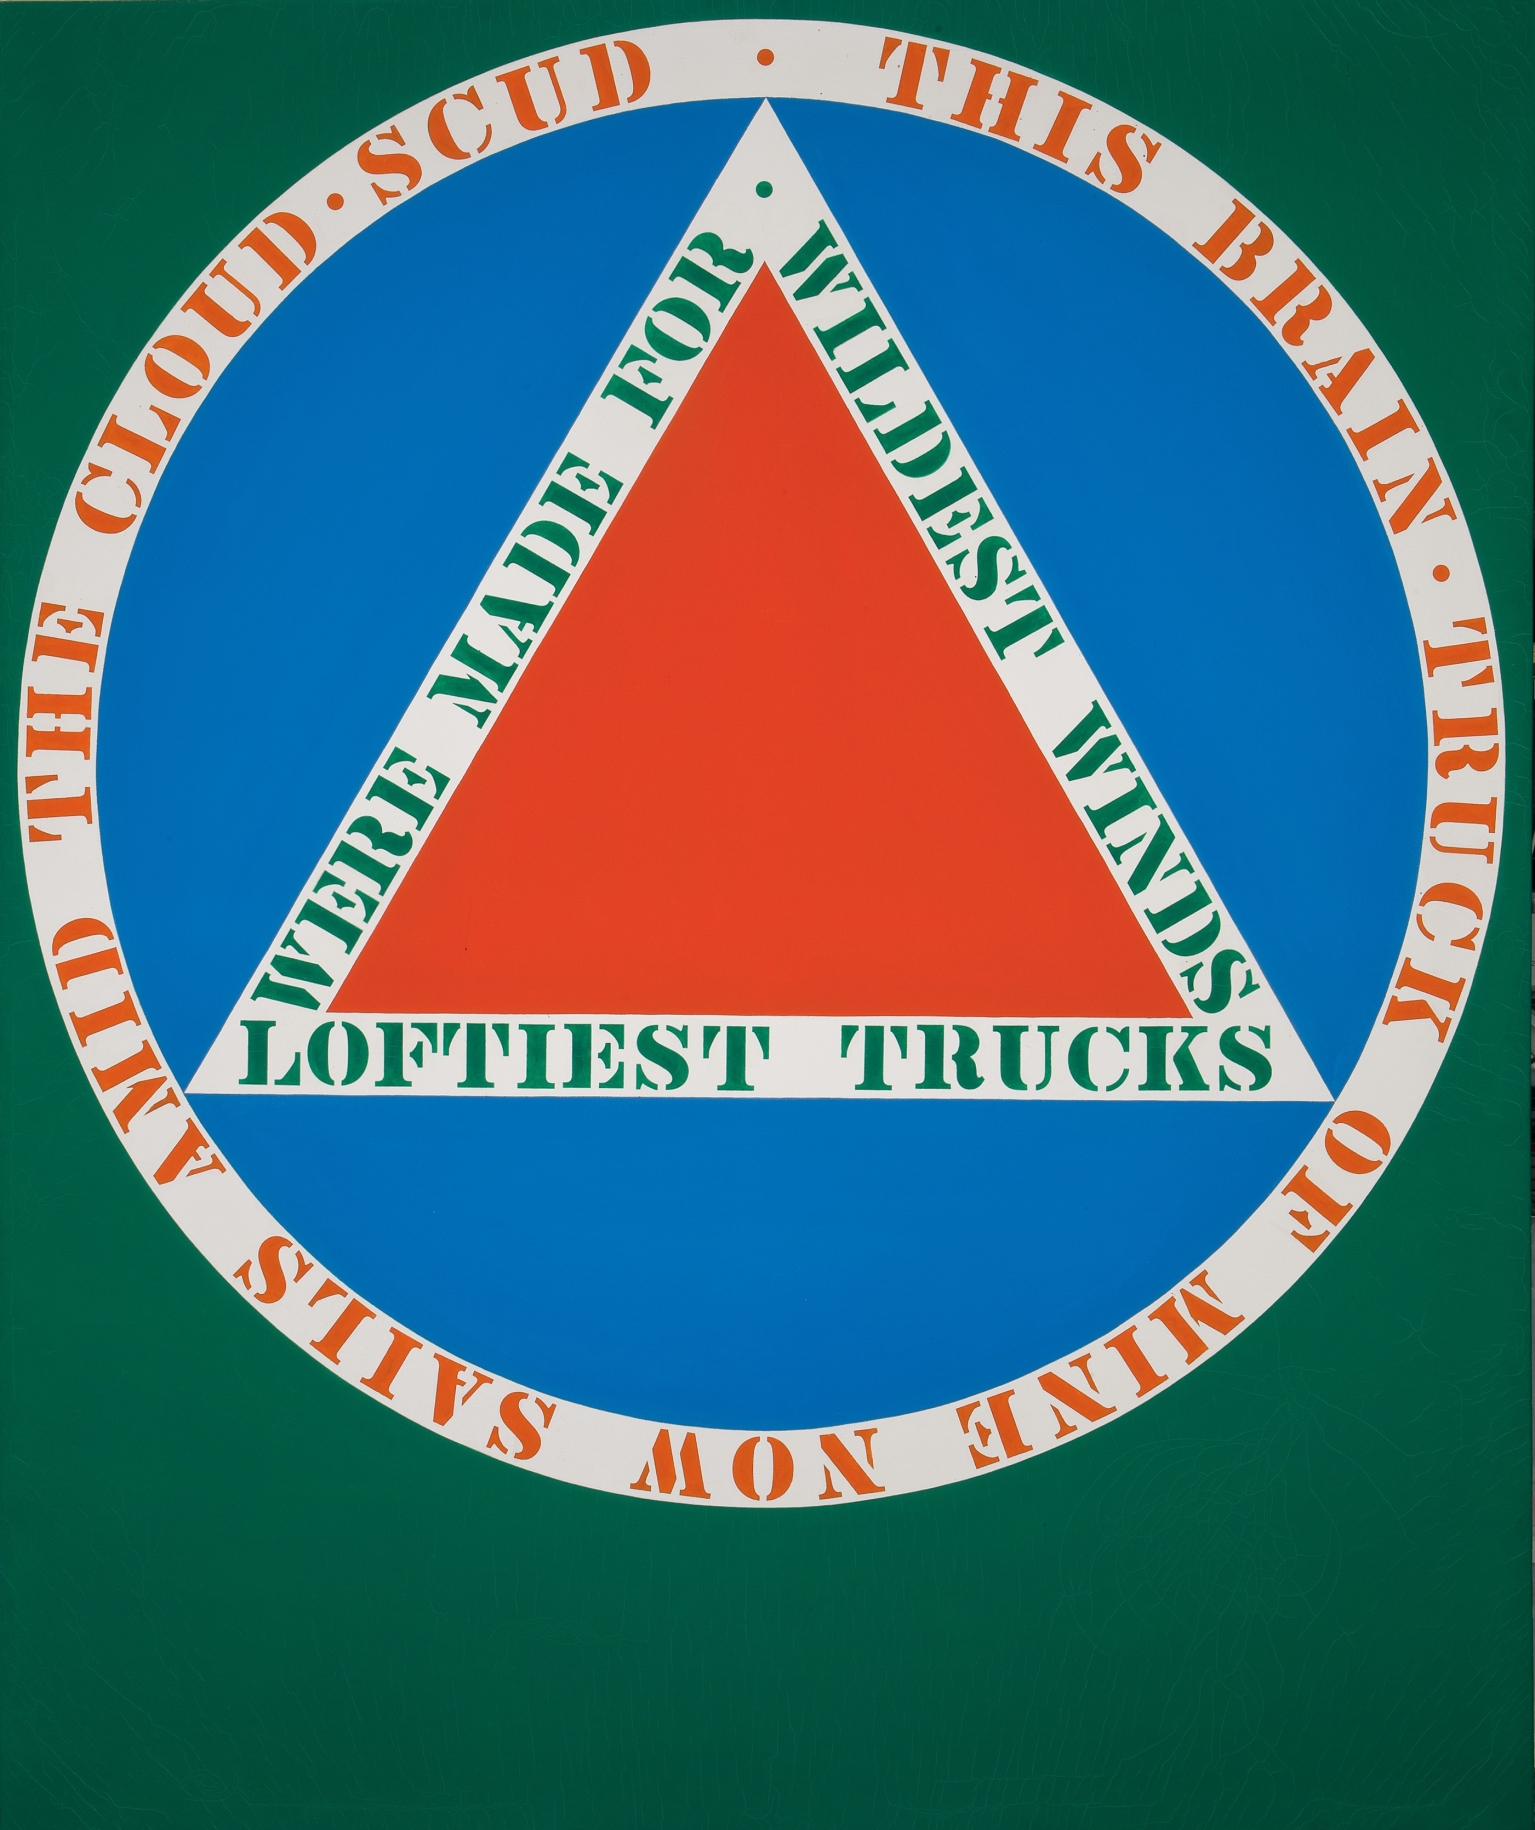 A 72 by 60 painting titled "Melville" that  consists of a large circle against a green background. In the center of the blue circle is a red triangle, surrounded by the stenciled green against white text "loftiest trucks were made for wildest winds." Red stenciled text in a white ring surrounding the circle reads "this brain truck of mine now sails amid the cloud scud"